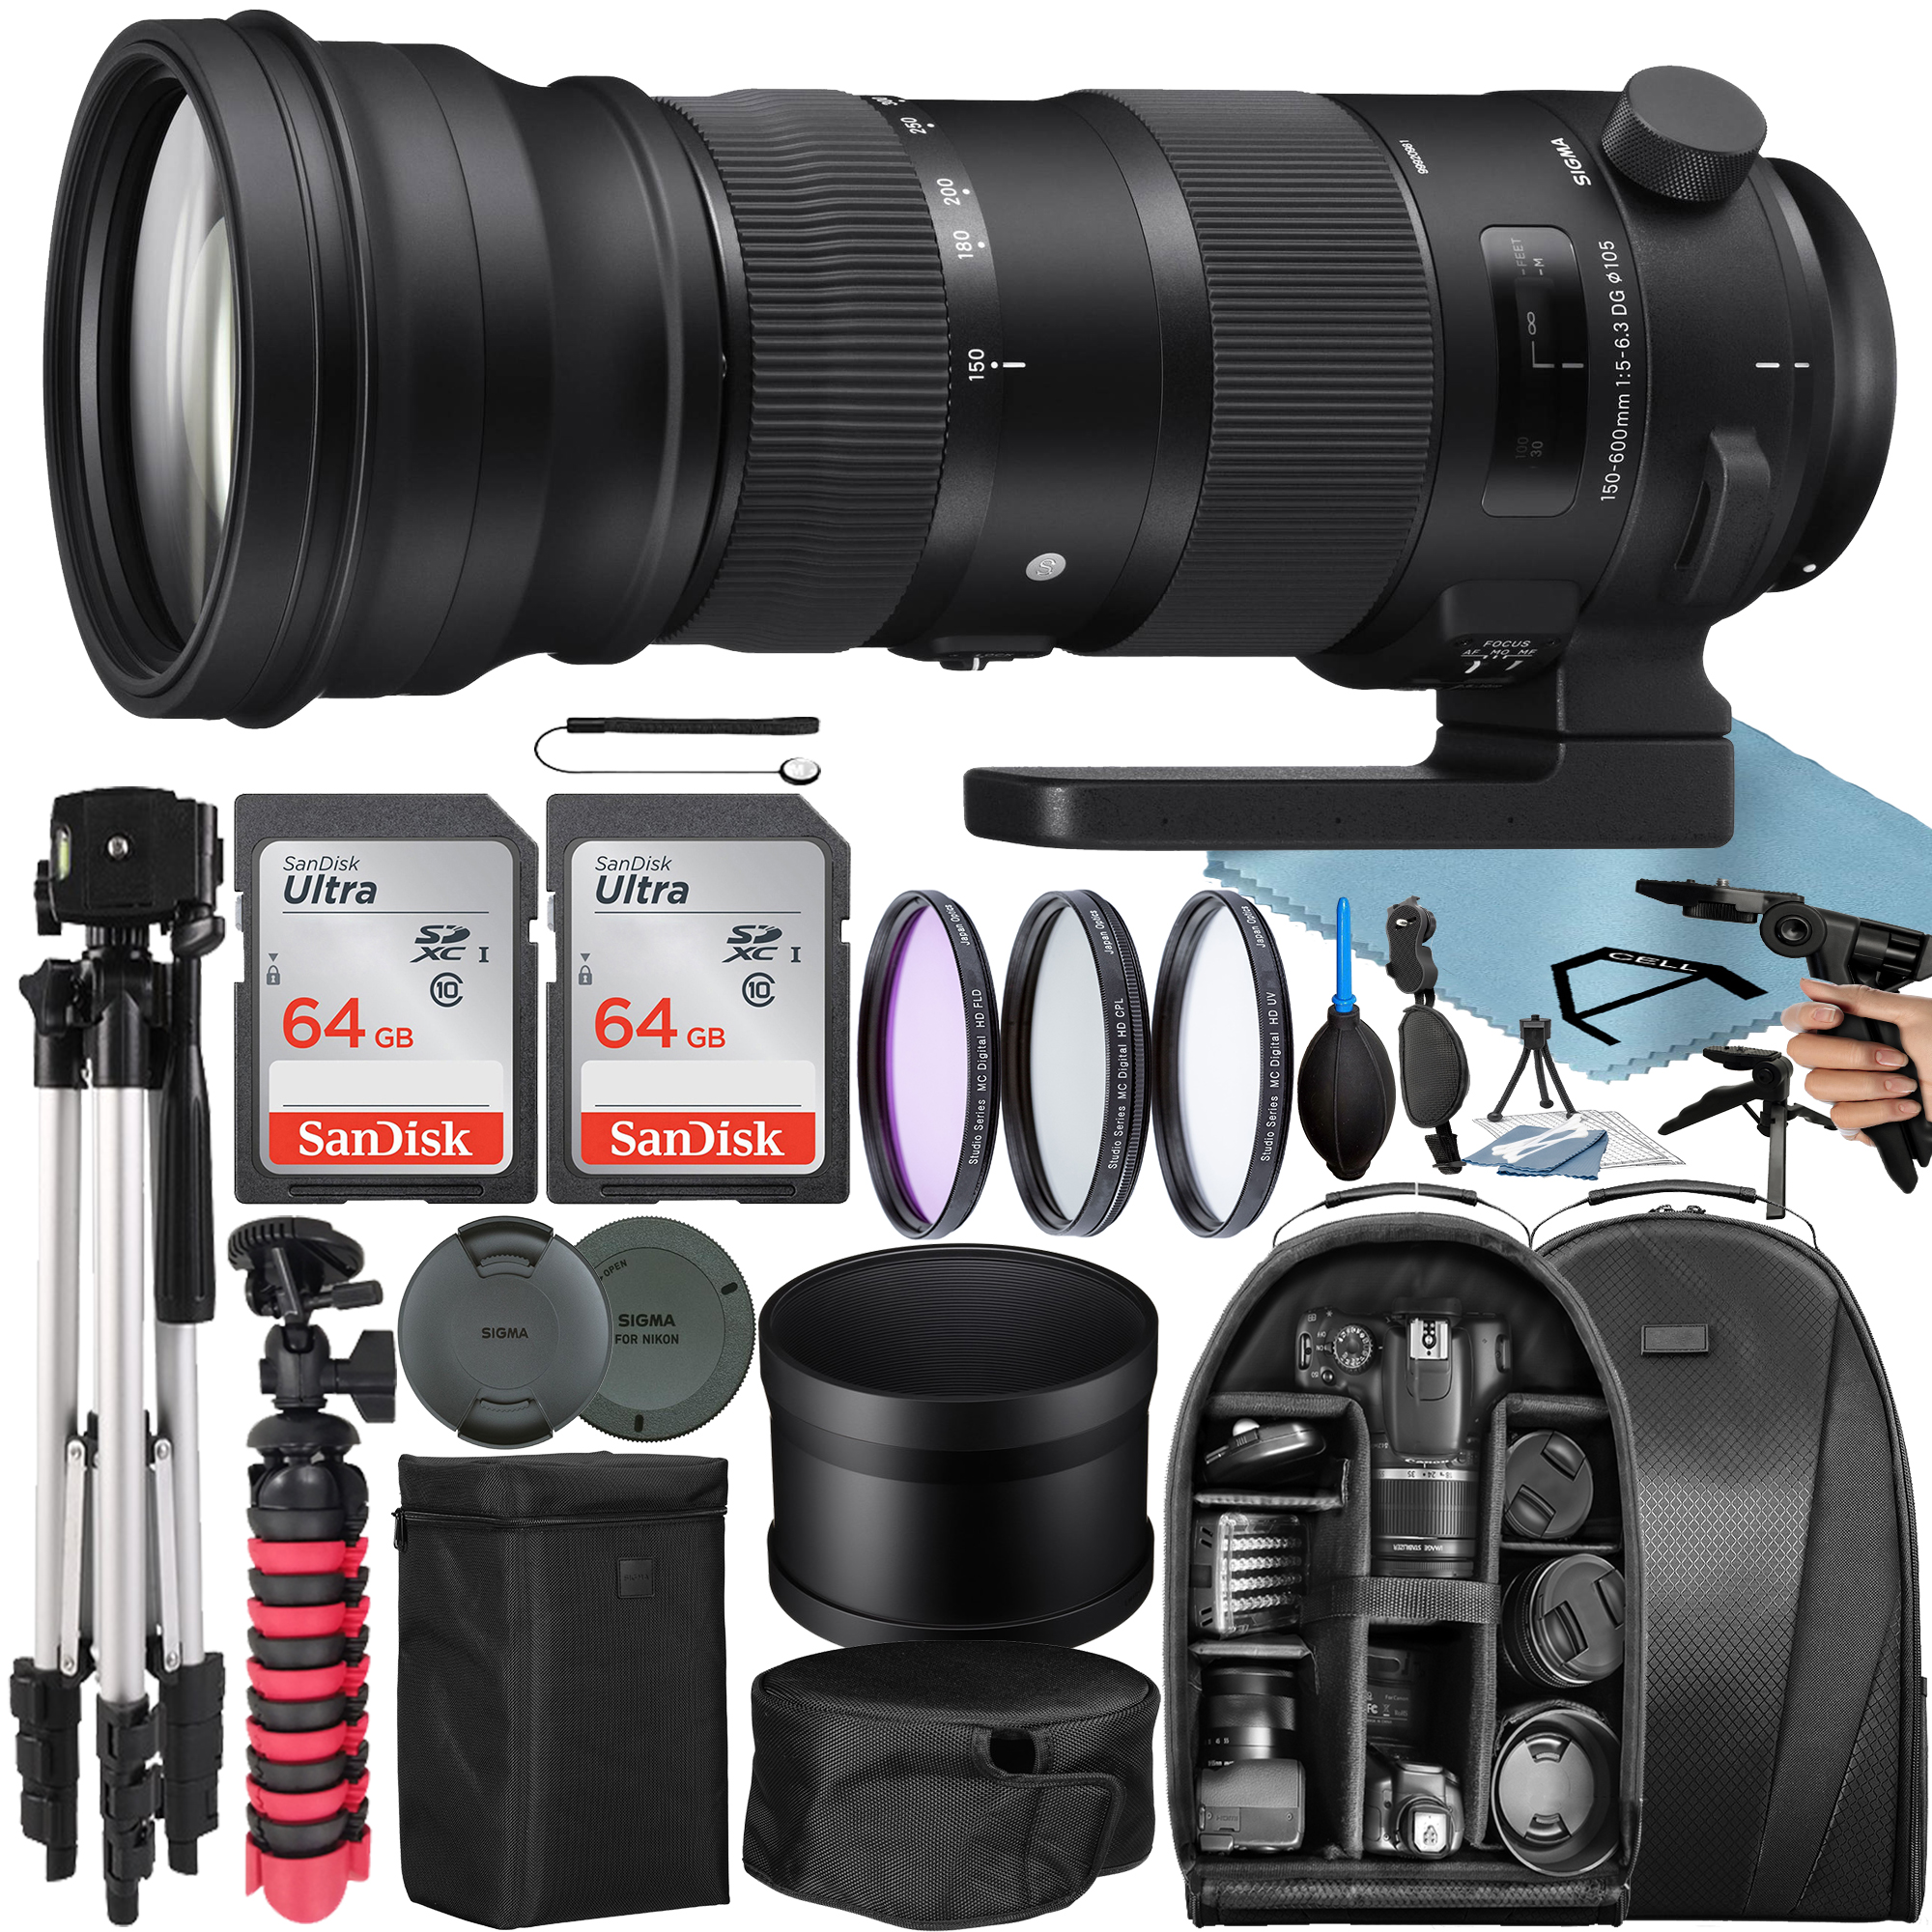 Sigma 150-600mm f/5-6.3 DG OS HSM Sports Lens for Nikon F with 2 Pack 64GB SanDisk Memory Card + Tripod + Backpack + A-Cell Accessory Bundle